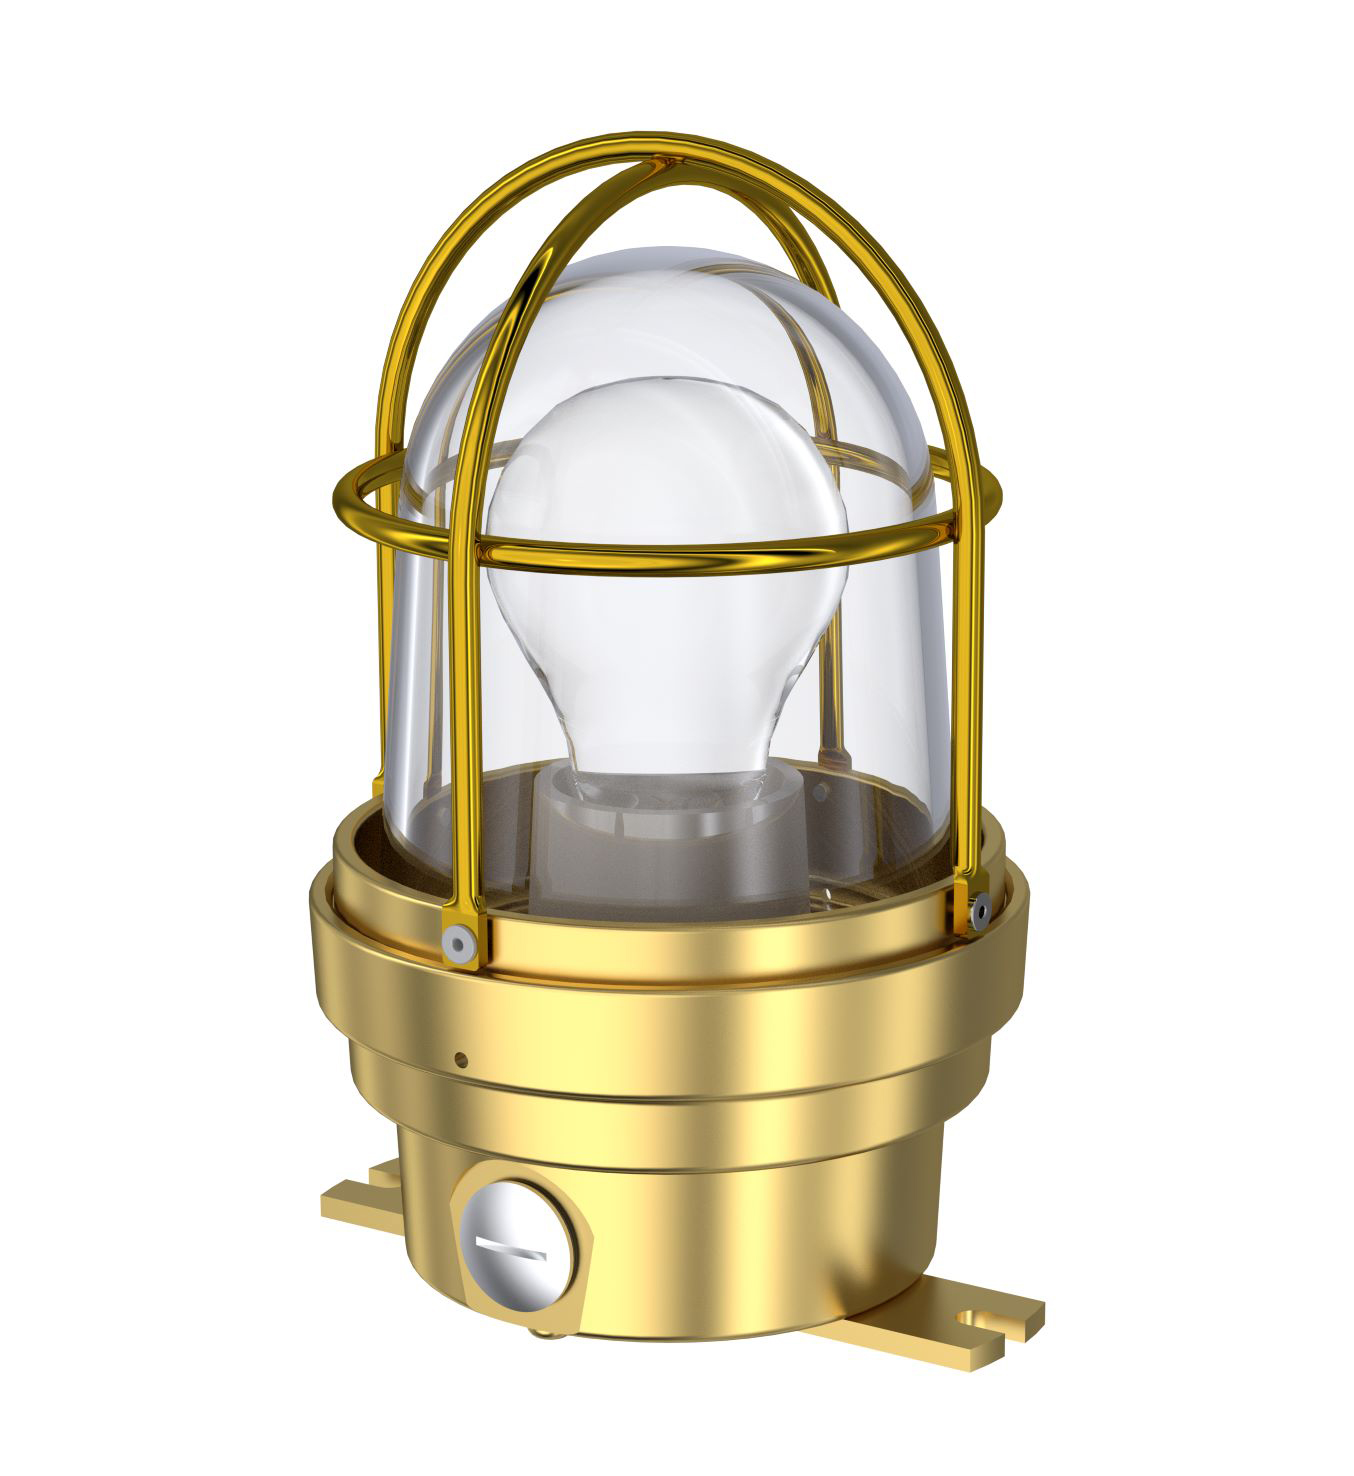 TEF 2438n Luminaire: Clear Globe, For Low Energy Light Source E27, 230VAC, IP56, Brass/Polyc